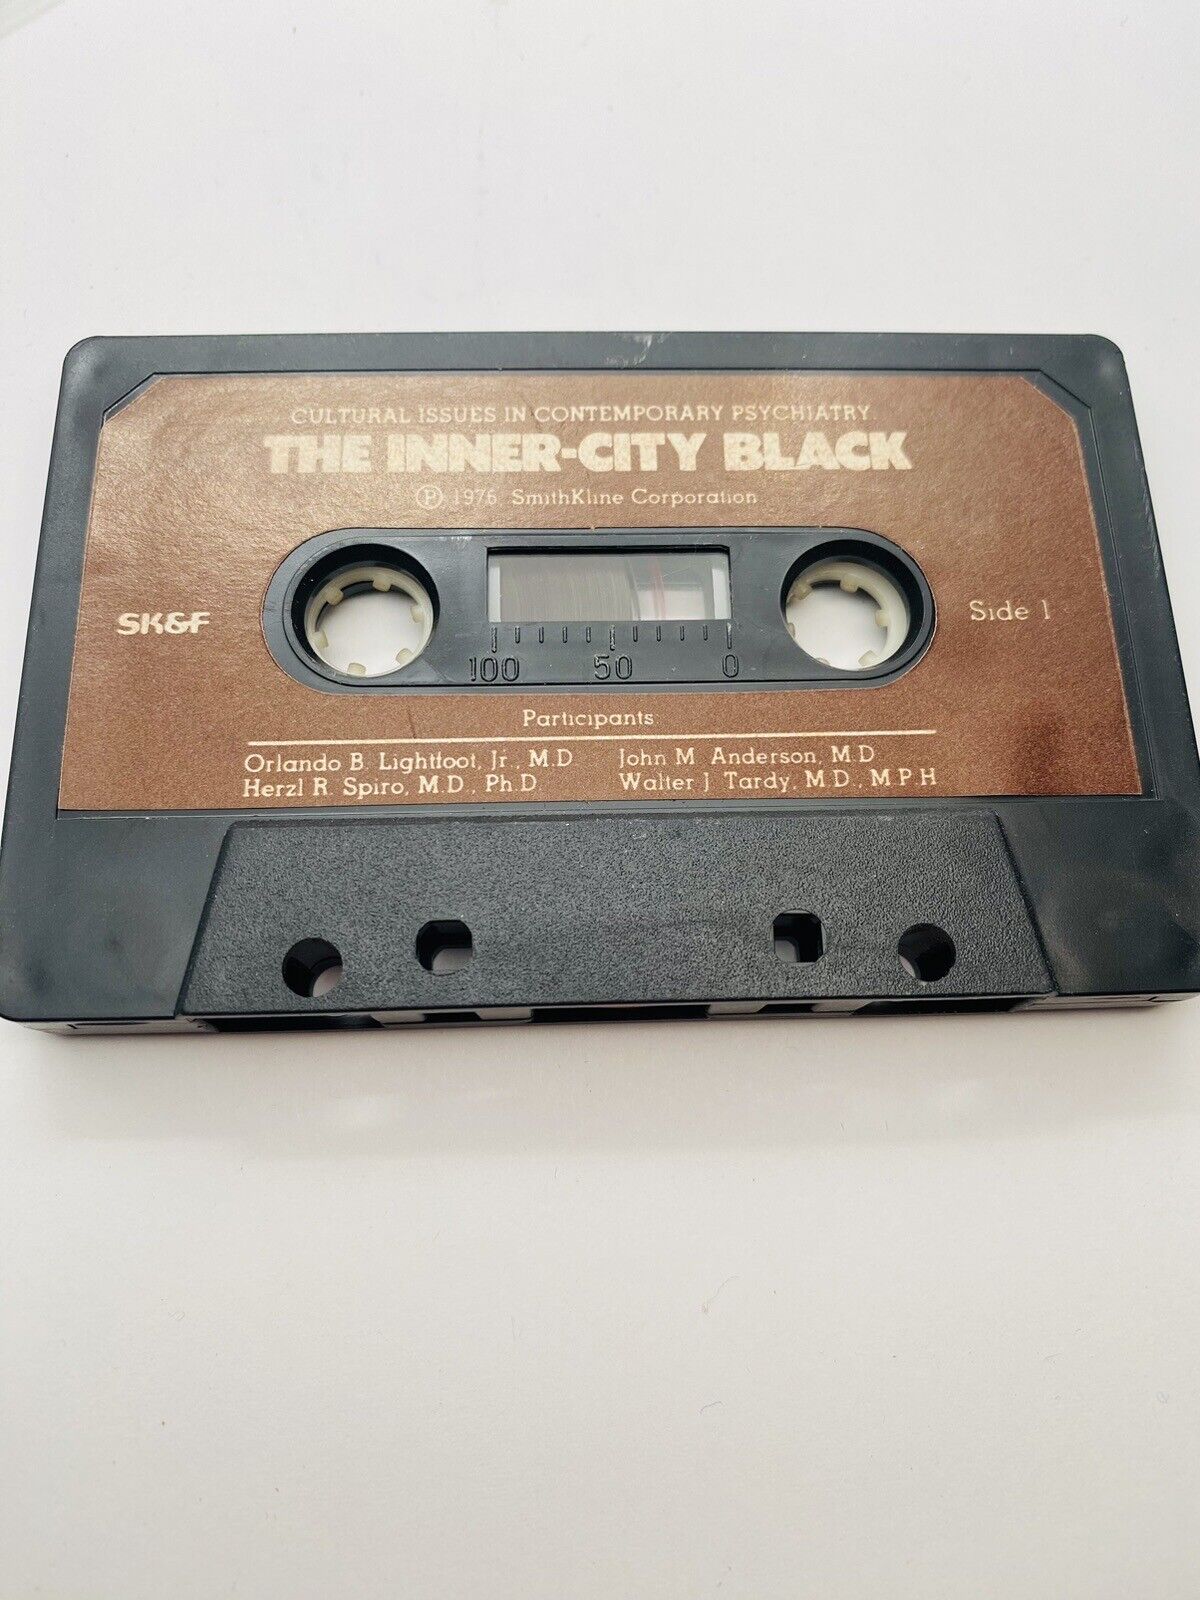 VINTAGE THERAPY THE INNER-CITY BLACK CASSETTE TAPE 1976 PSYCHOLOGY STUDY RARE